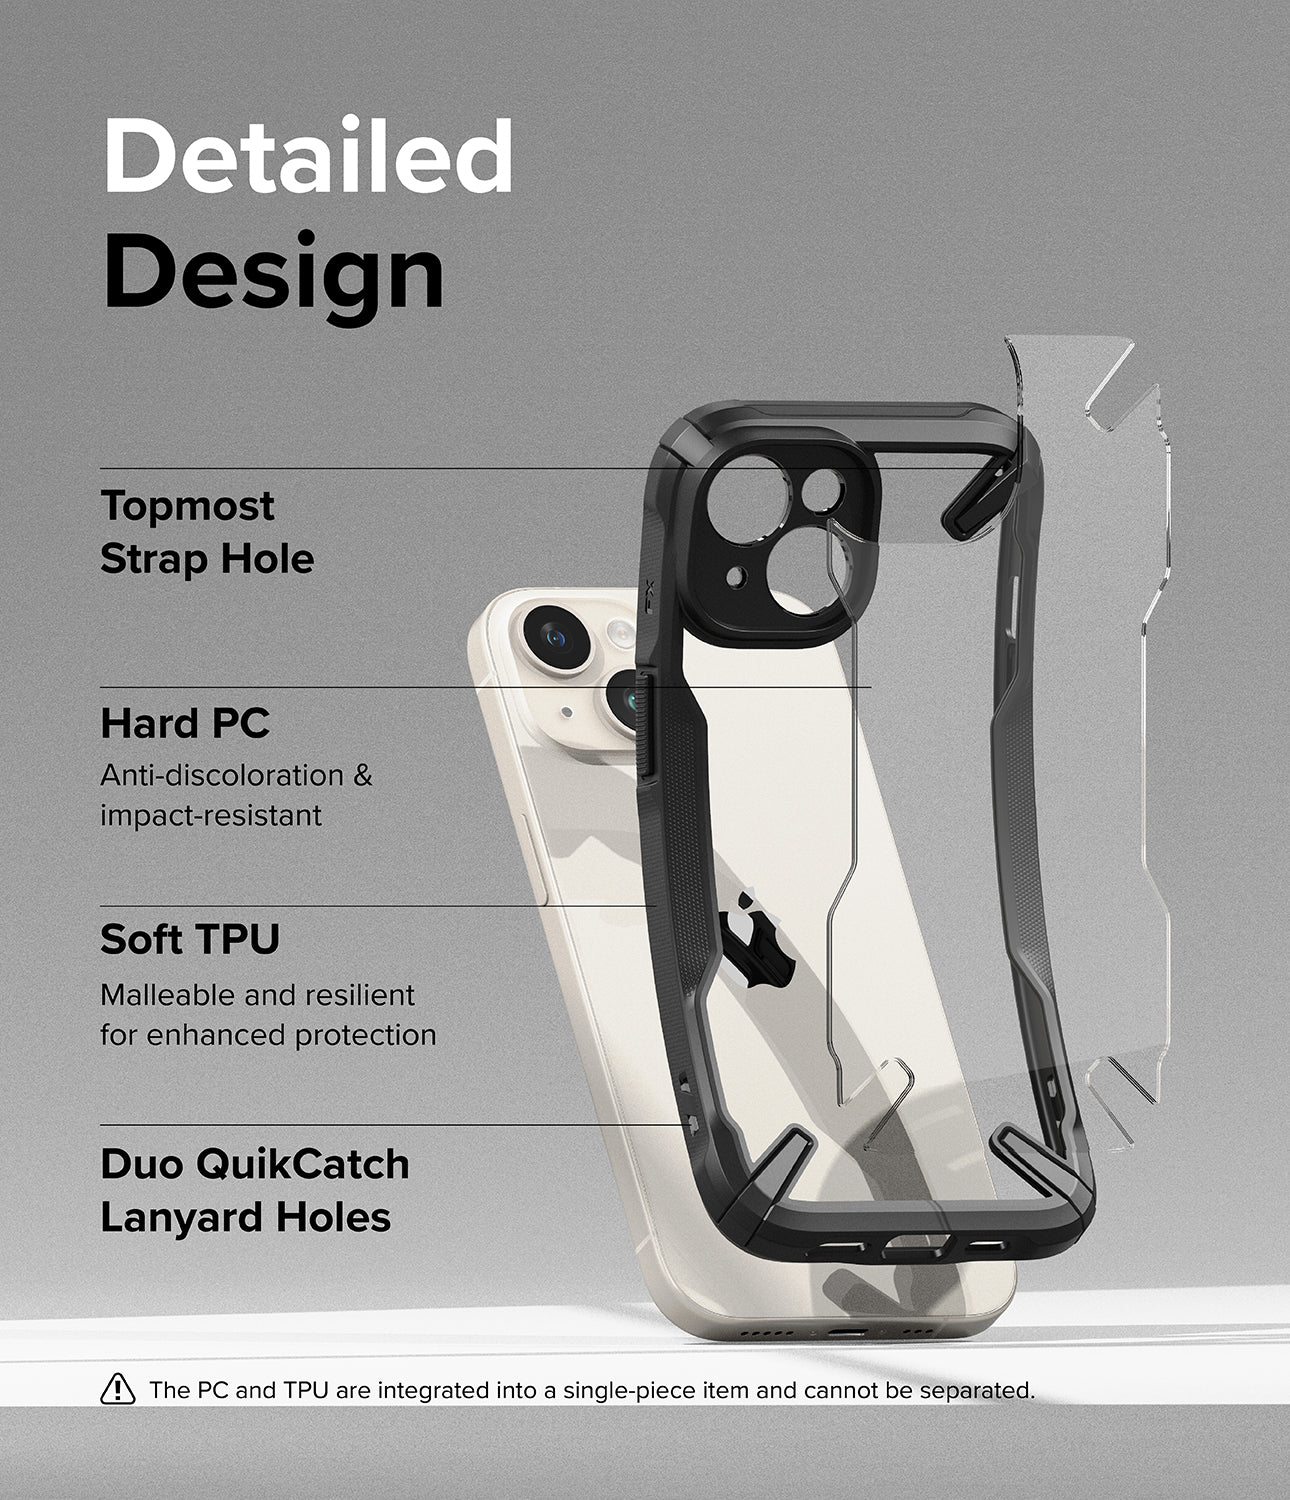 iPhone 15 Plus Case | Fusion-X - Detailed Design. Topmost Strap Hole. Hard PC. Anti-discoloration and impact-resistant. Soft TPU. Malleable and resilient for enhanced protection. Duo QuikCatch Lanyard Holes